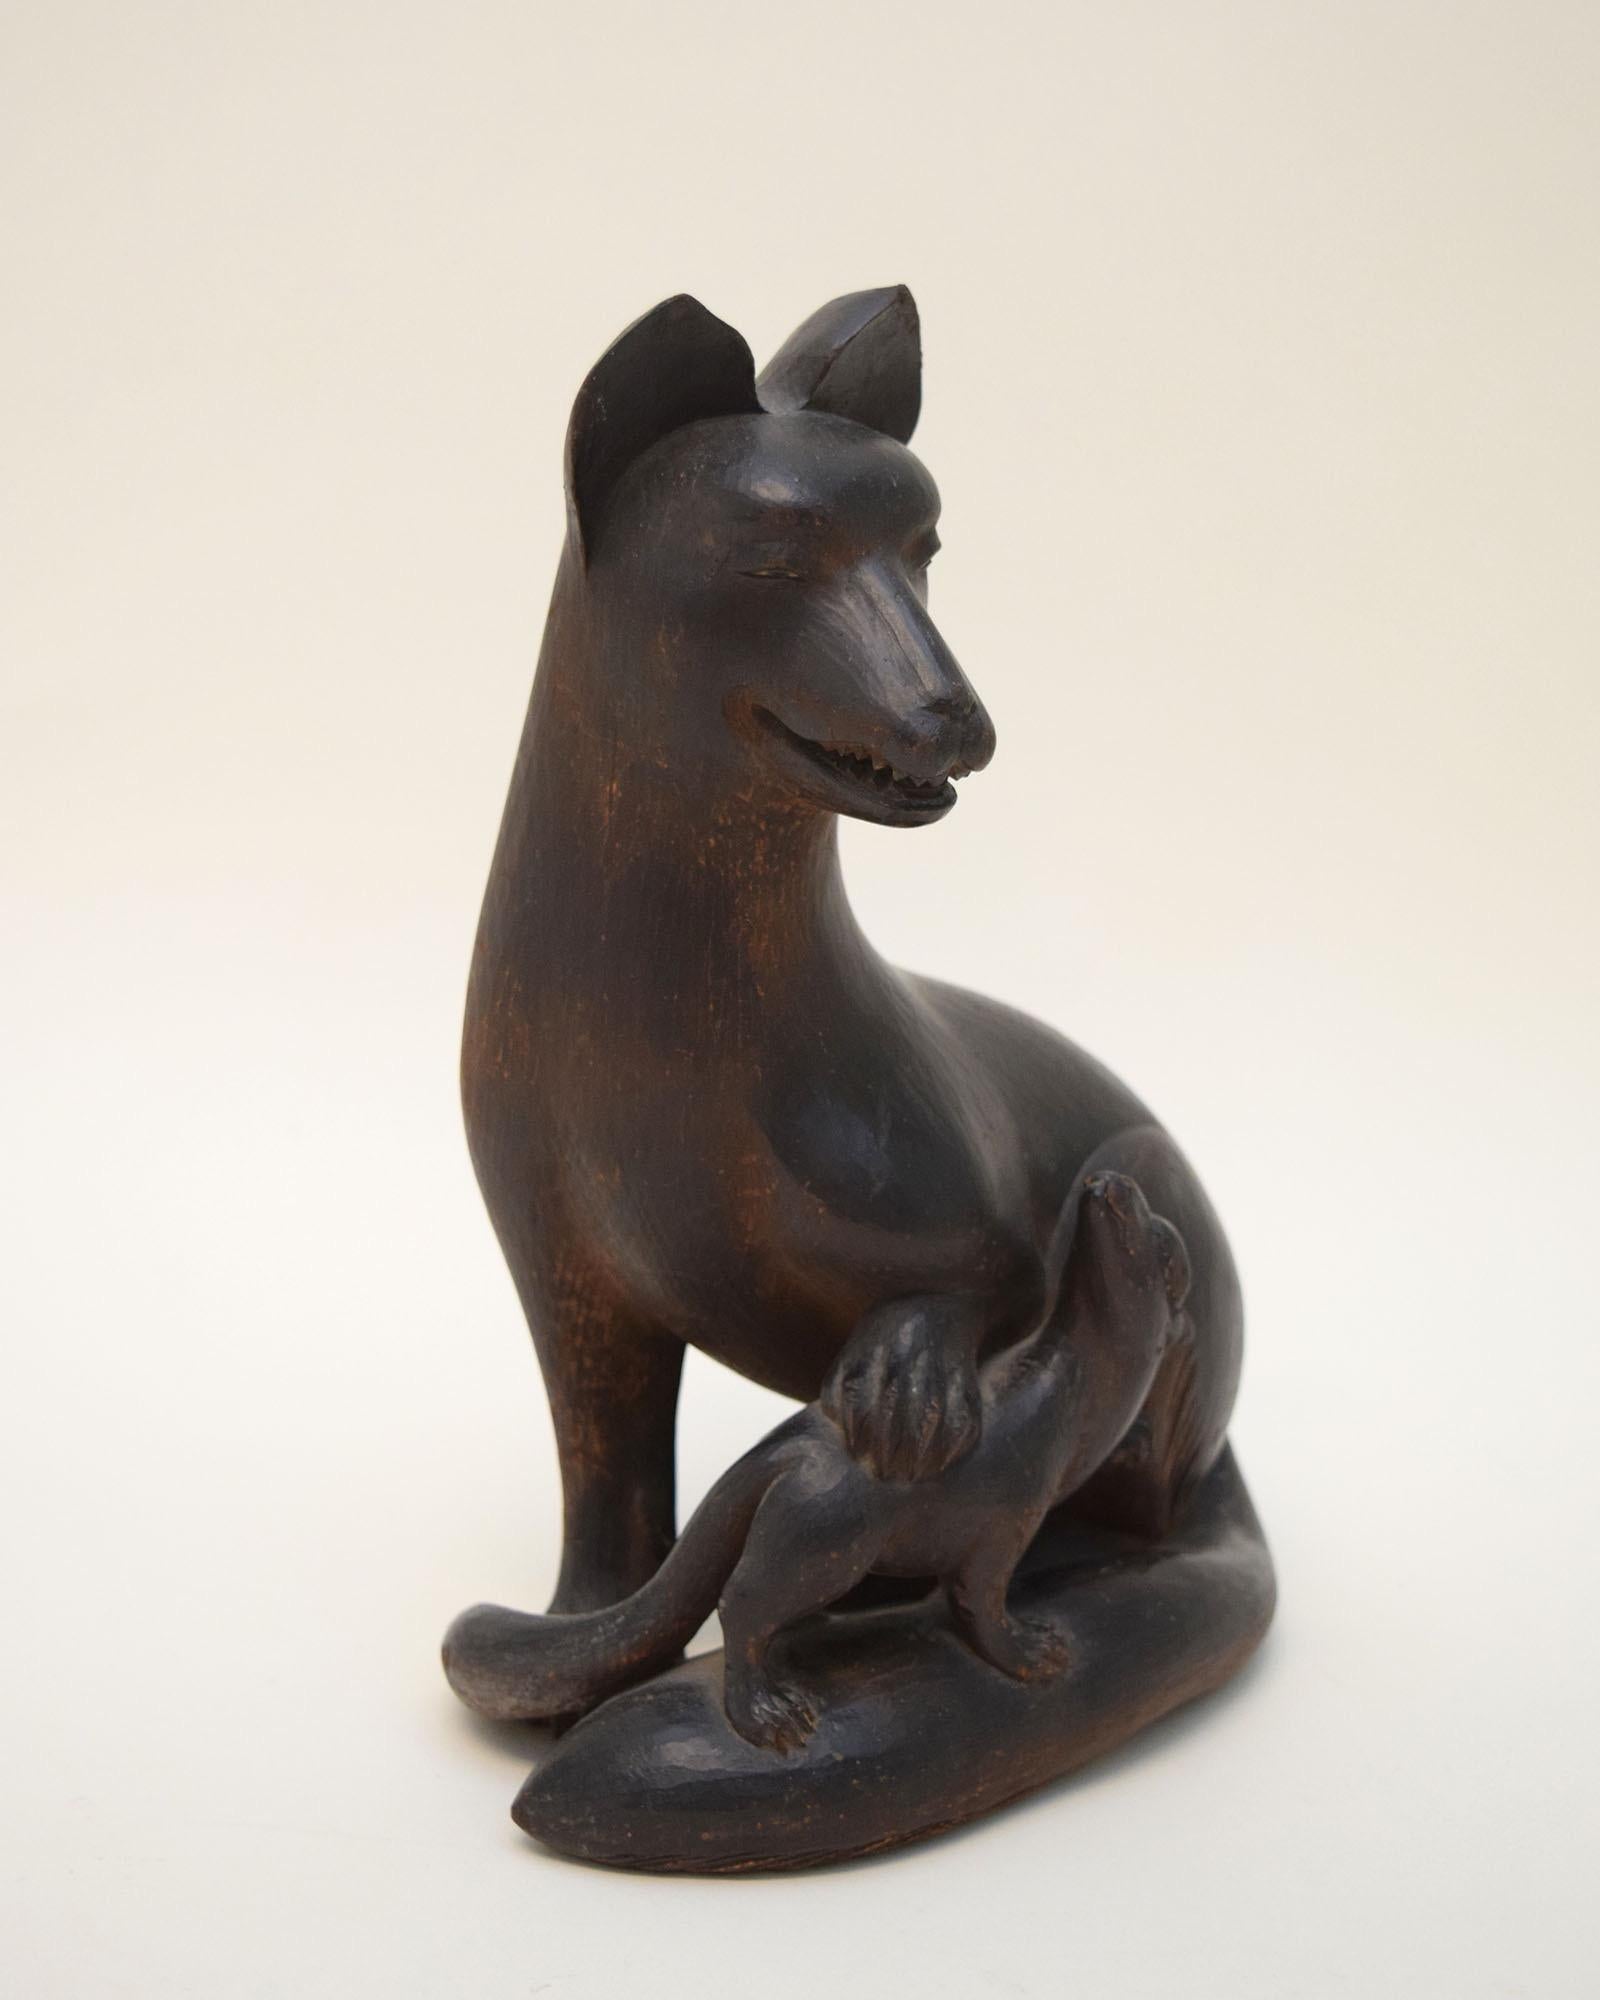 According to Japanese folklore the fox, or kitsune, can assume human form to protect and trick humble country folk. Dating to the 18th century, this fox protects its own pup. Carved and painted with a dull black lacquer finish called urushi, it’s